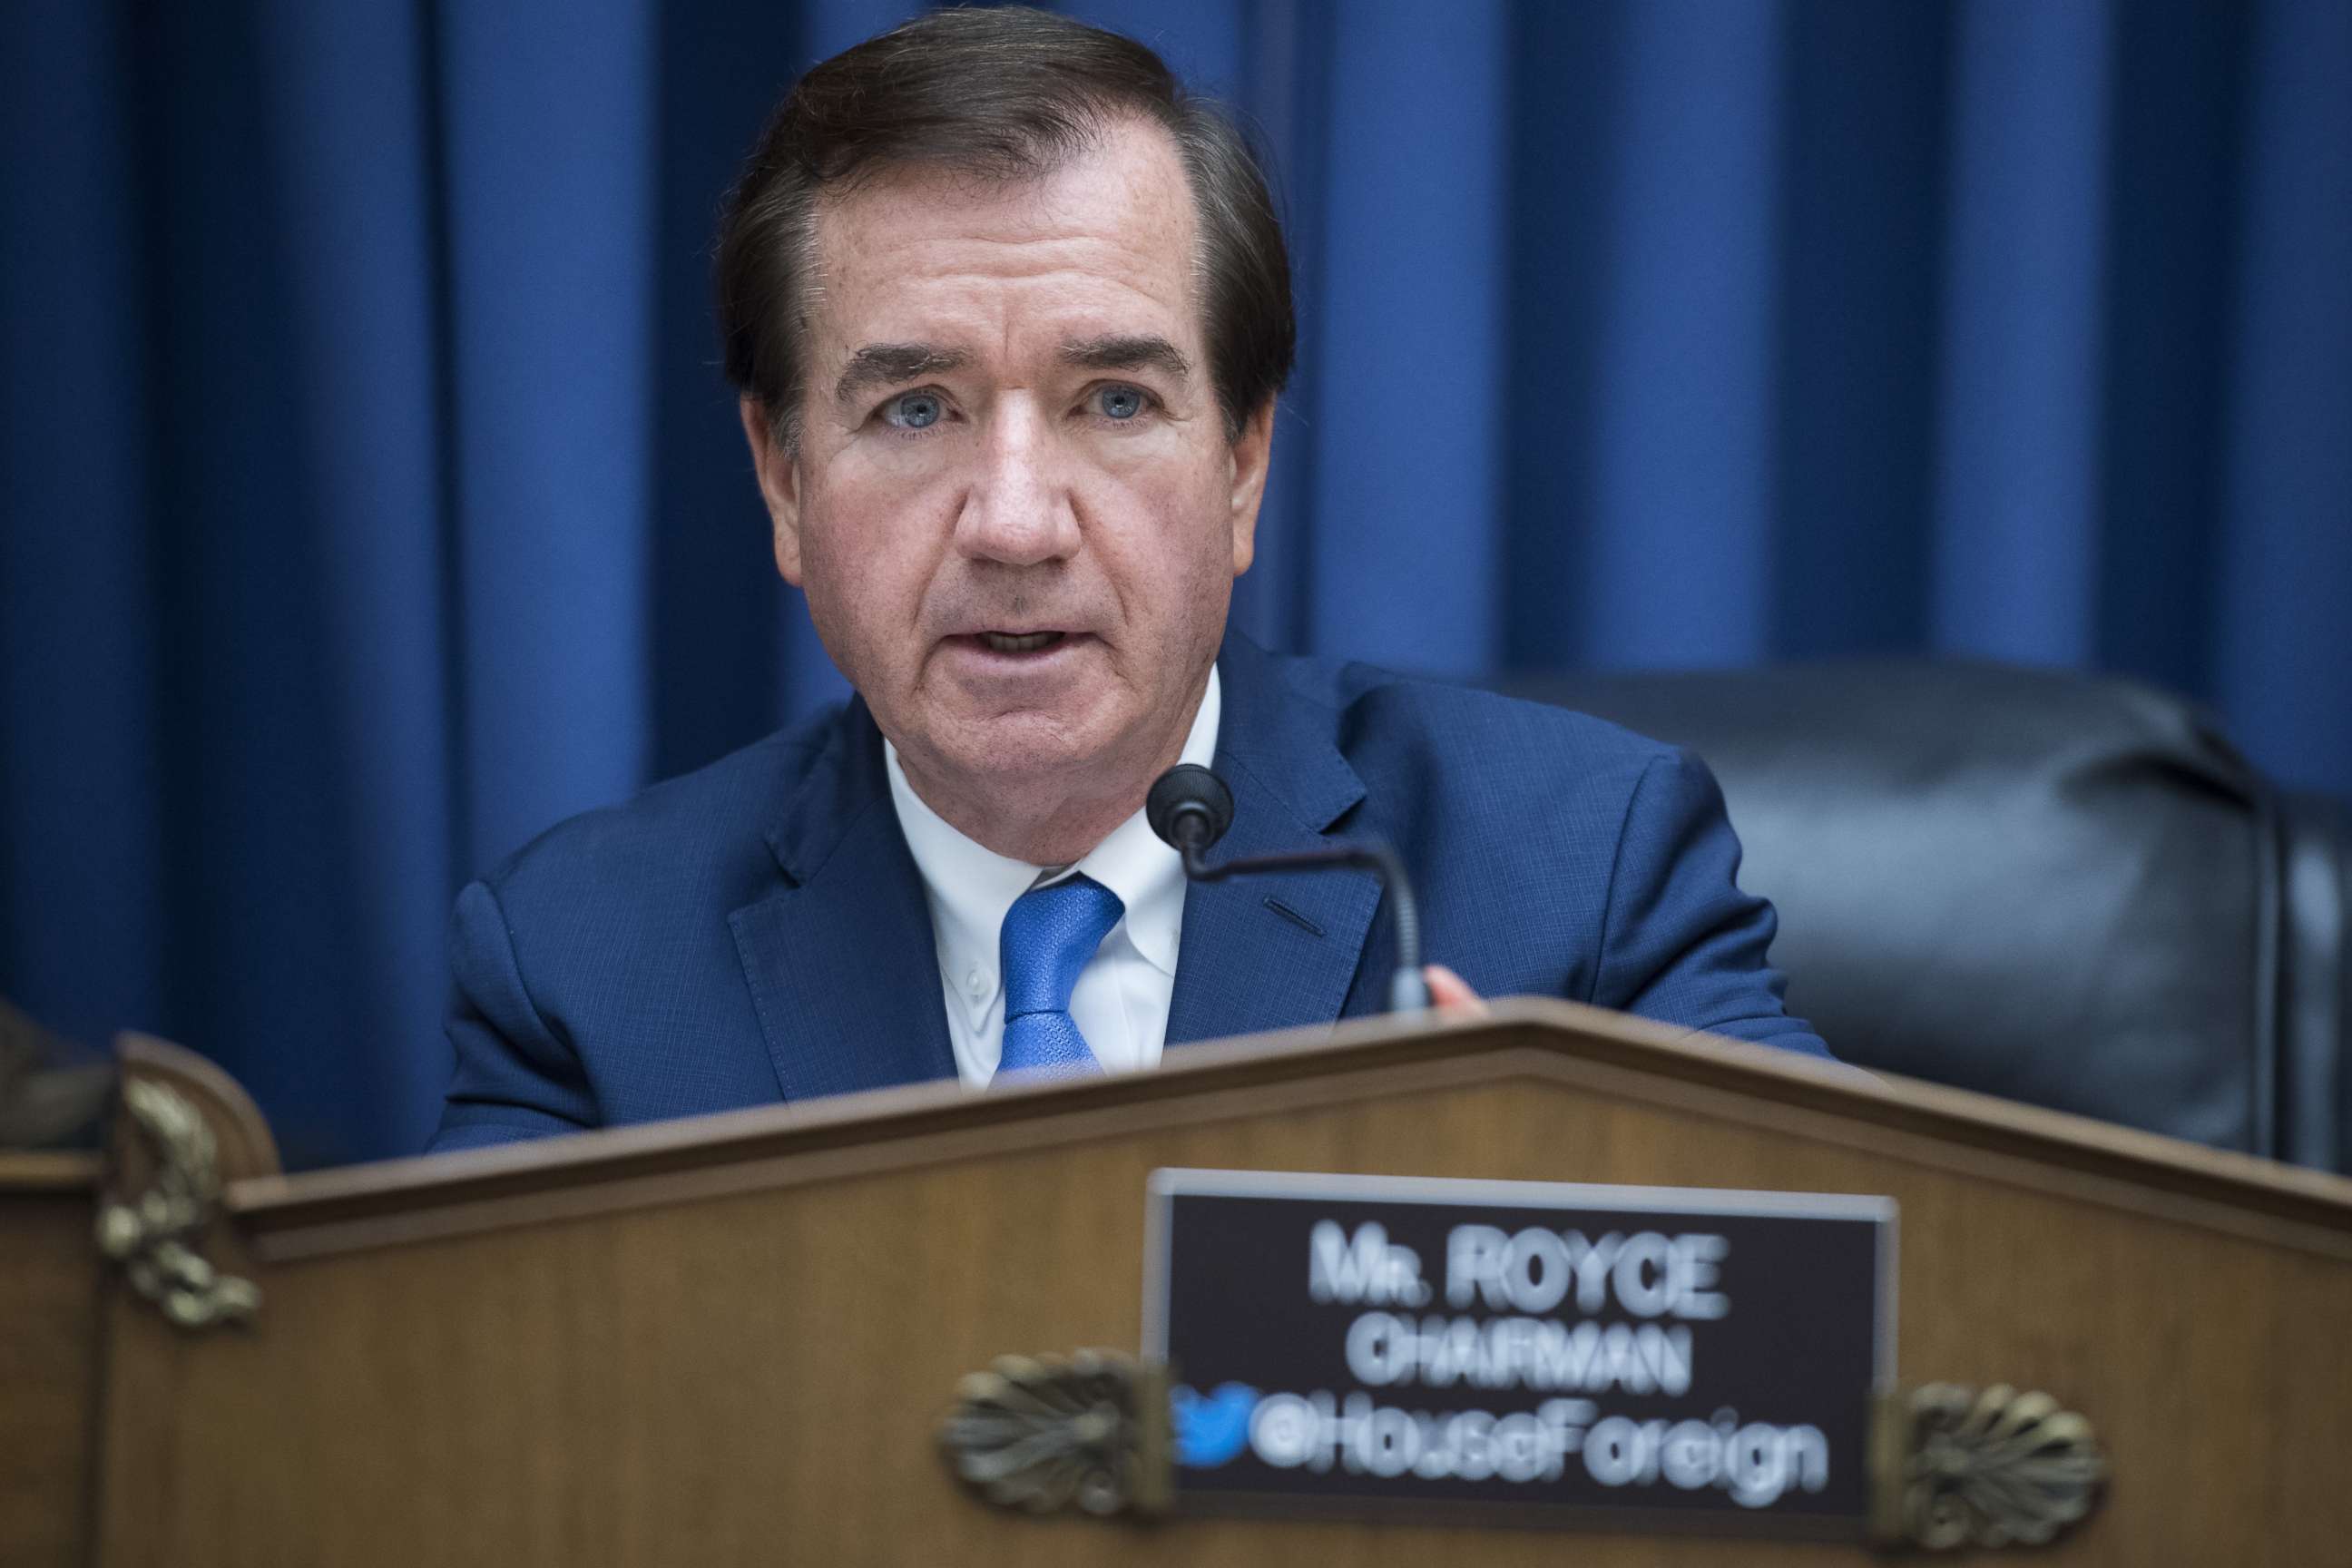 Ed Royce, Chairman of the House Foreign Affairs Committee during a recent committee hearing, May 17, 2018.